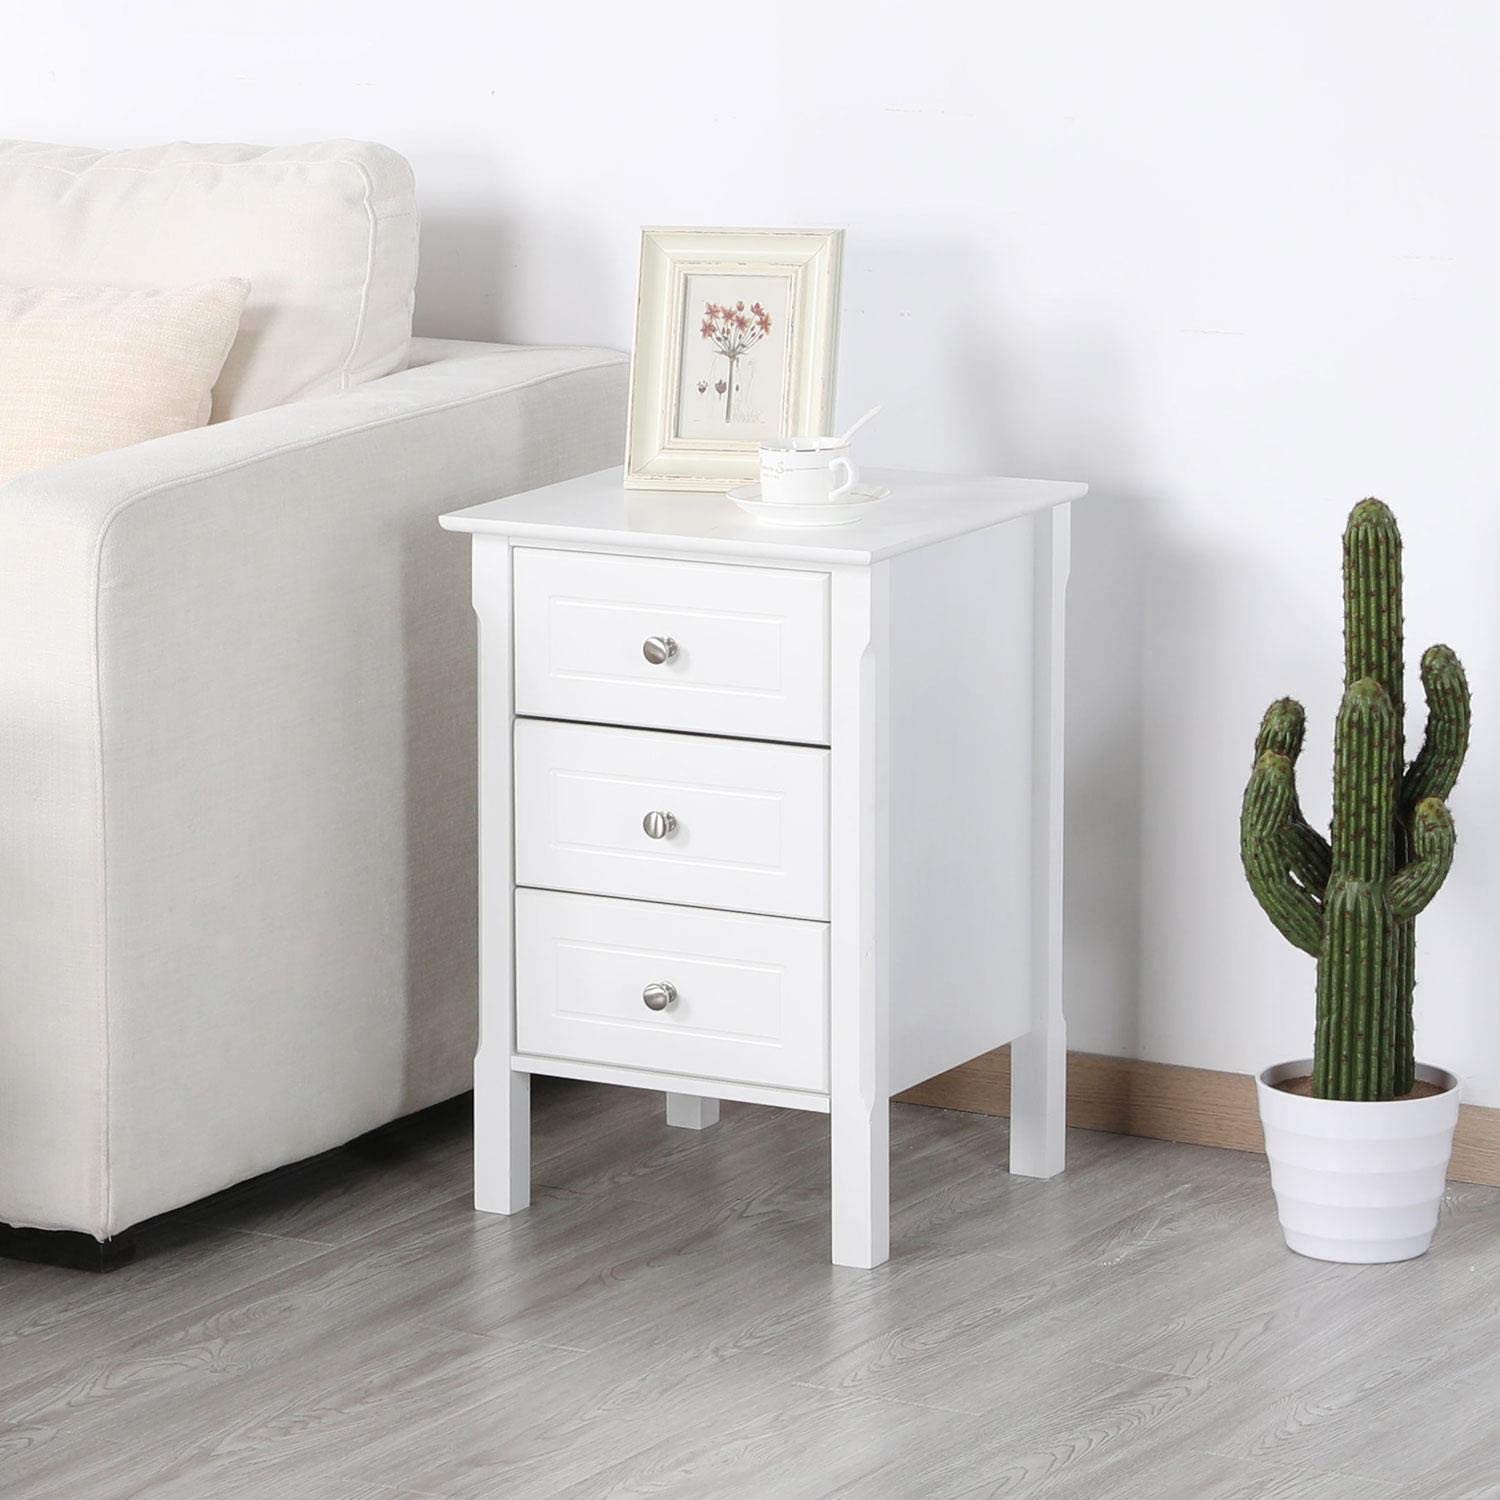  Side Tables: End Table with 3 Drawers